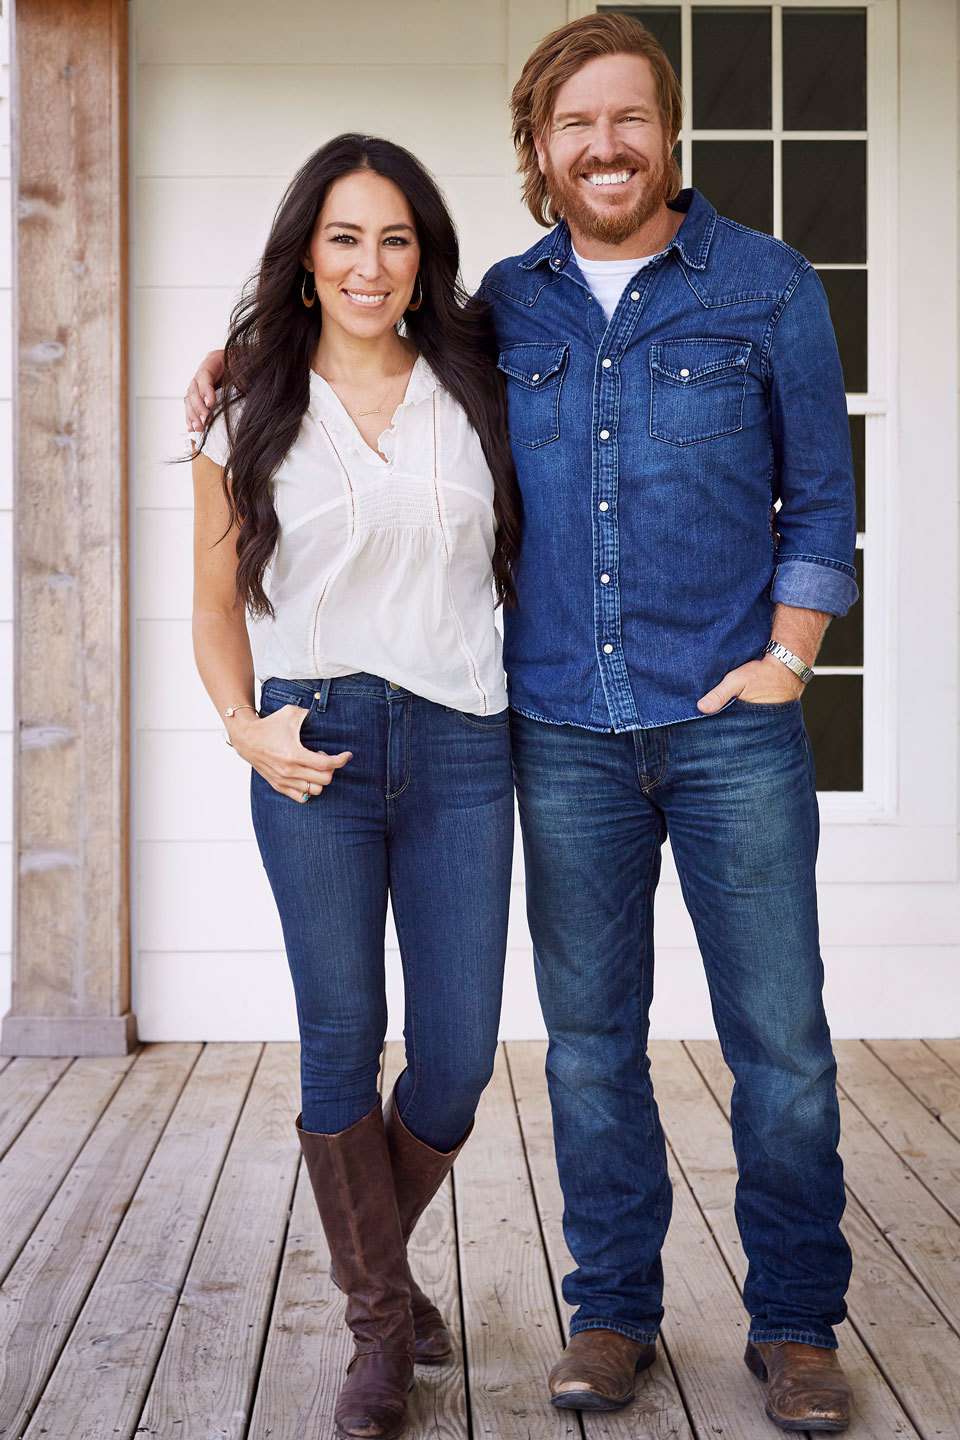 The First Look at Chip & Joanna Gaines's New Target Line